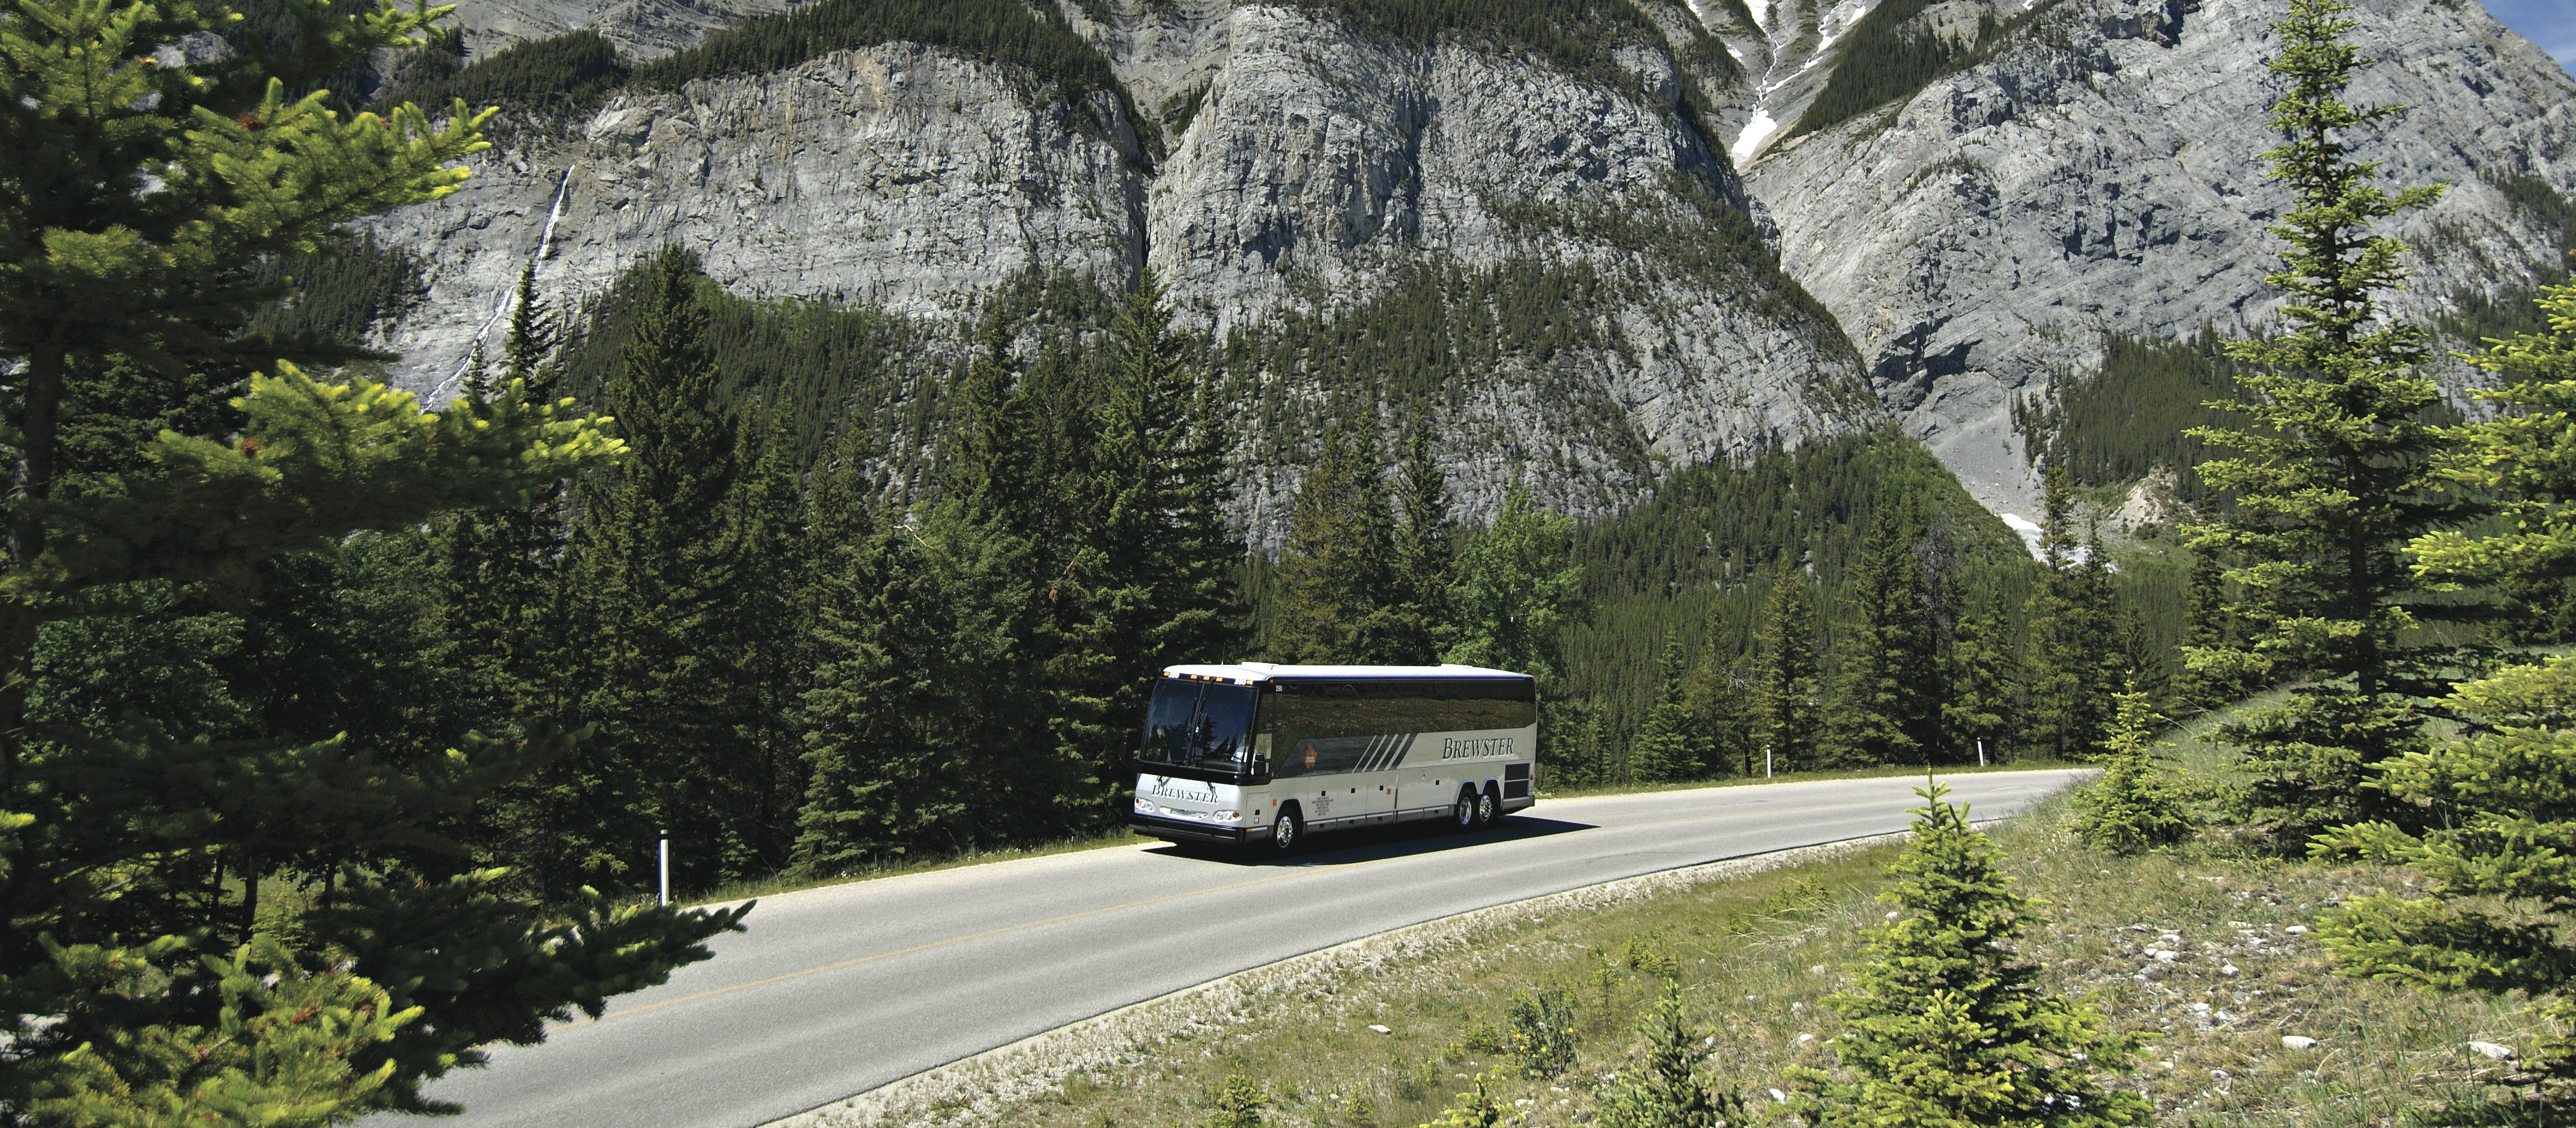 Brewster Motorcoach in the Canadian Rockies near the town of Banff.